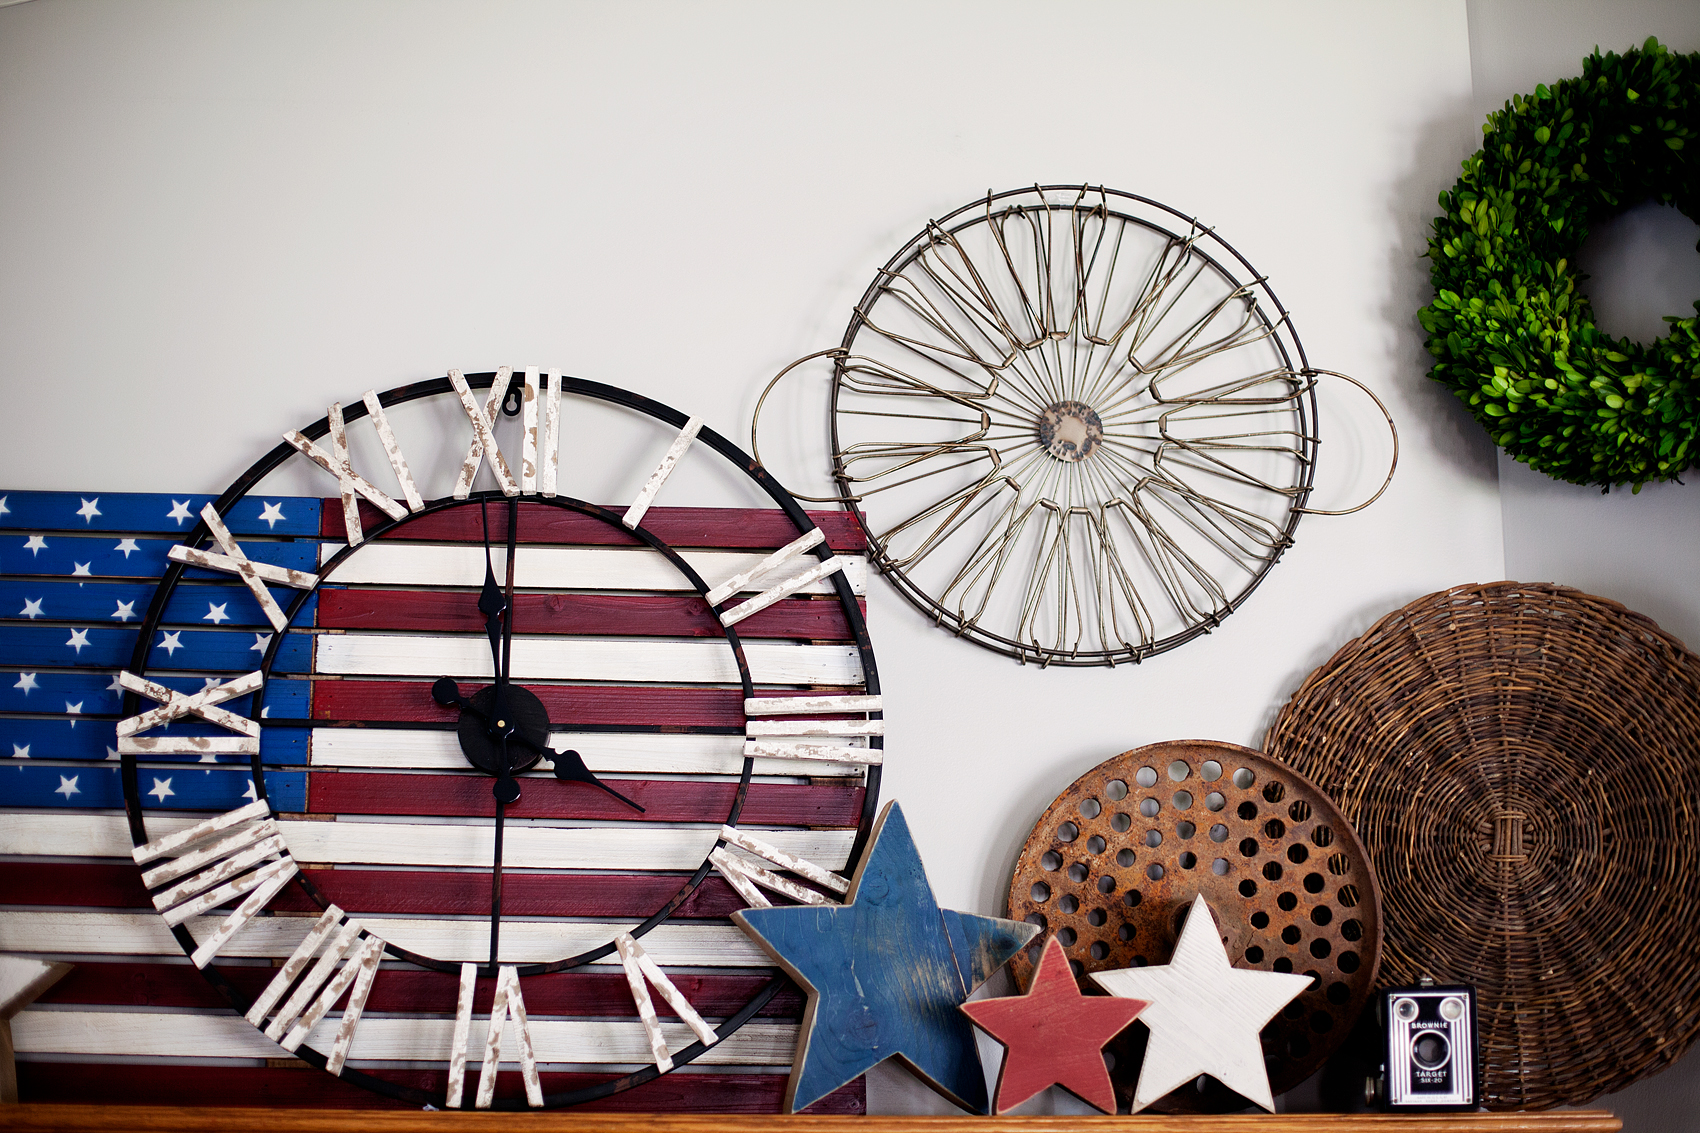 • Red White and Blue Decor • With the Summer months rolling in, it's time to give a little nod to our favorite ole' Red White and Blue! Michaels has a whole new line of FUN Americana decor that you're going to love! Here's what I found to dress-up my mantel for the Summer holidays via WhipperBerry